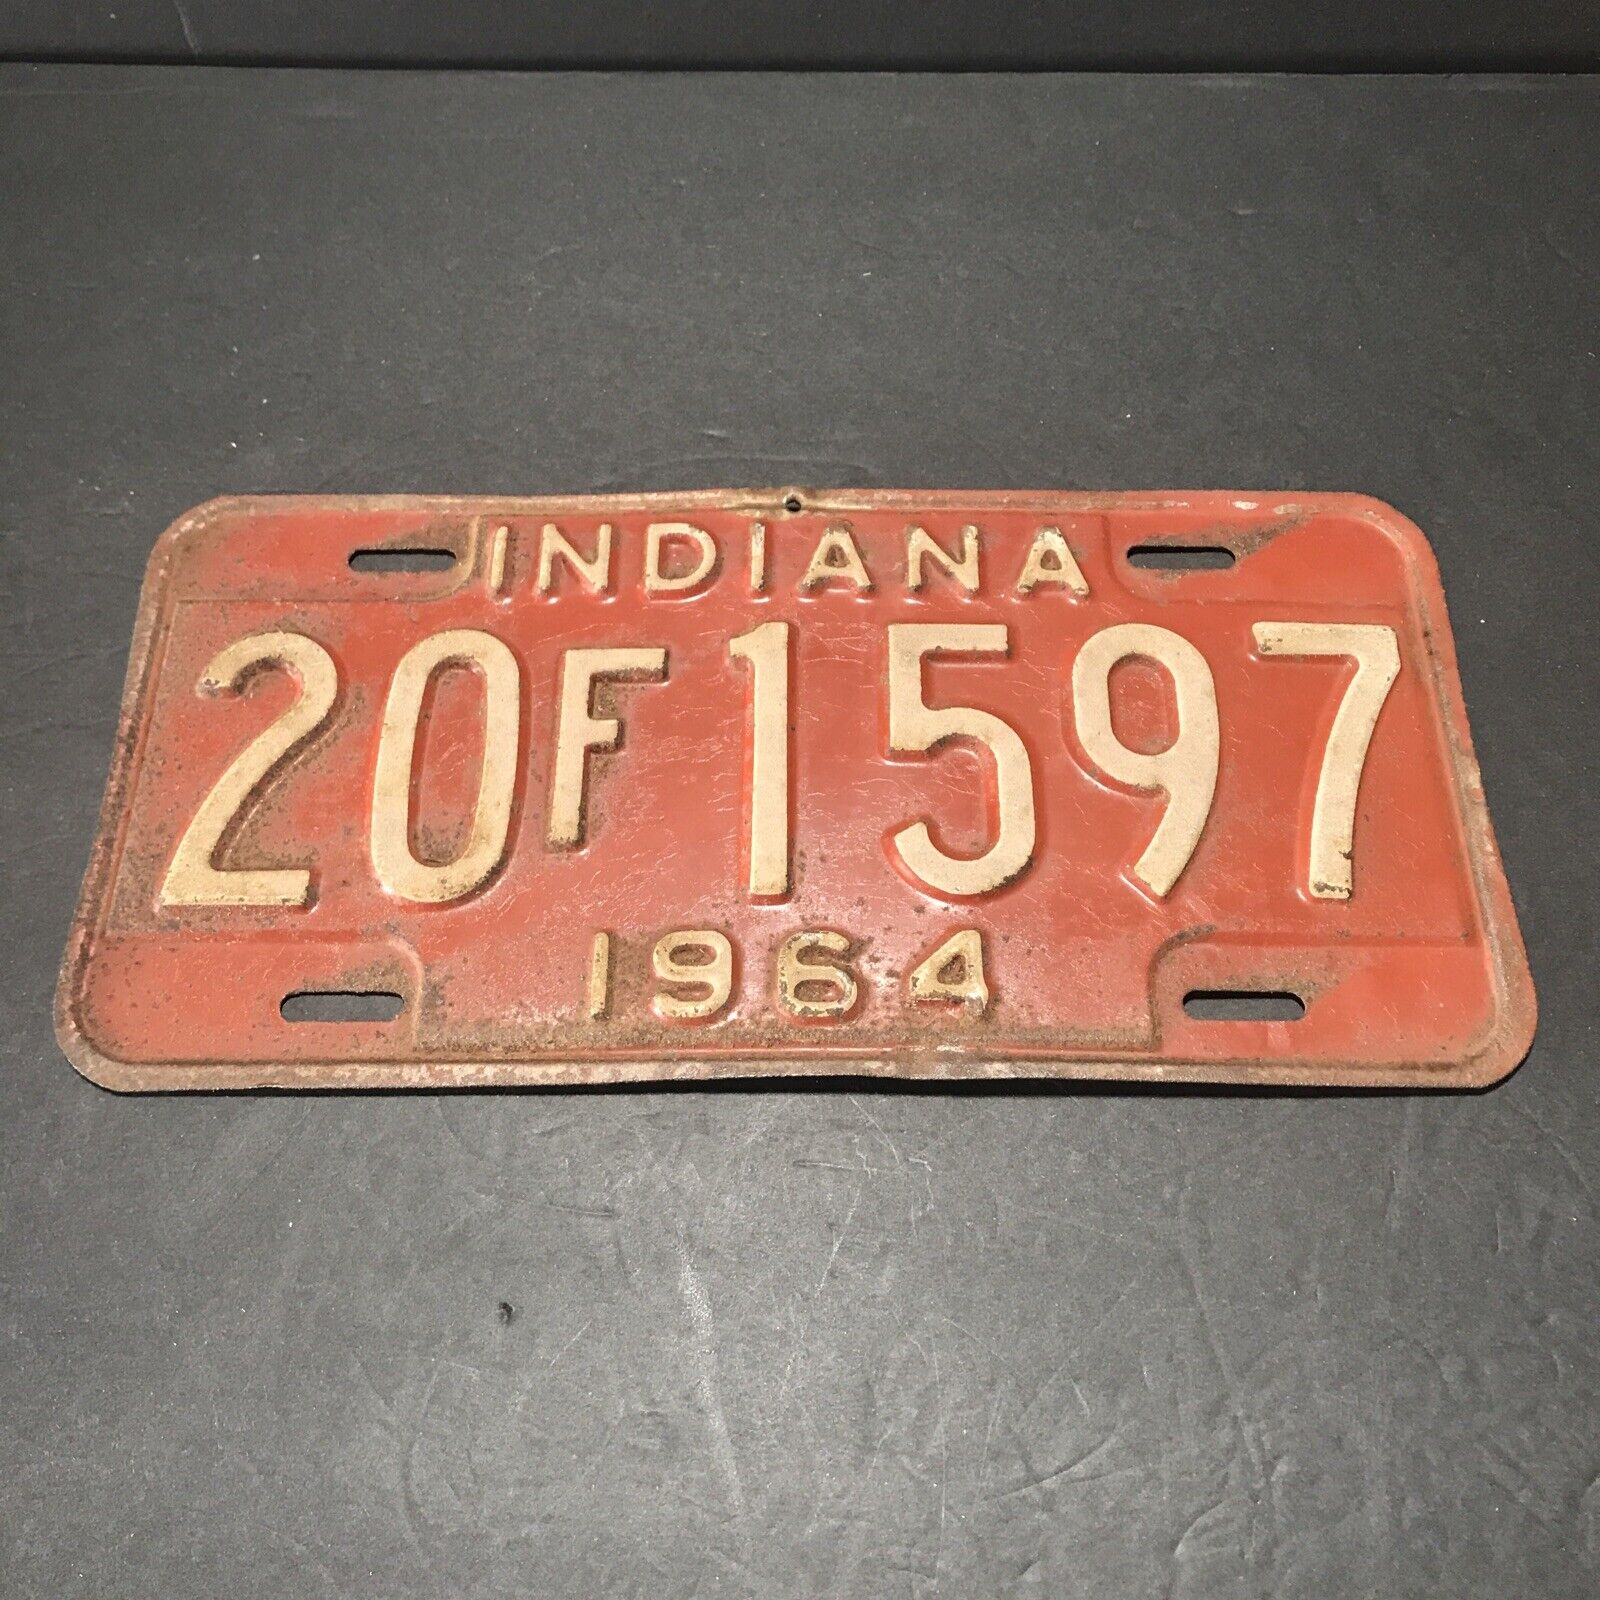 1964 Indiana License Plate Elkhart County 20F1597 Original Condition